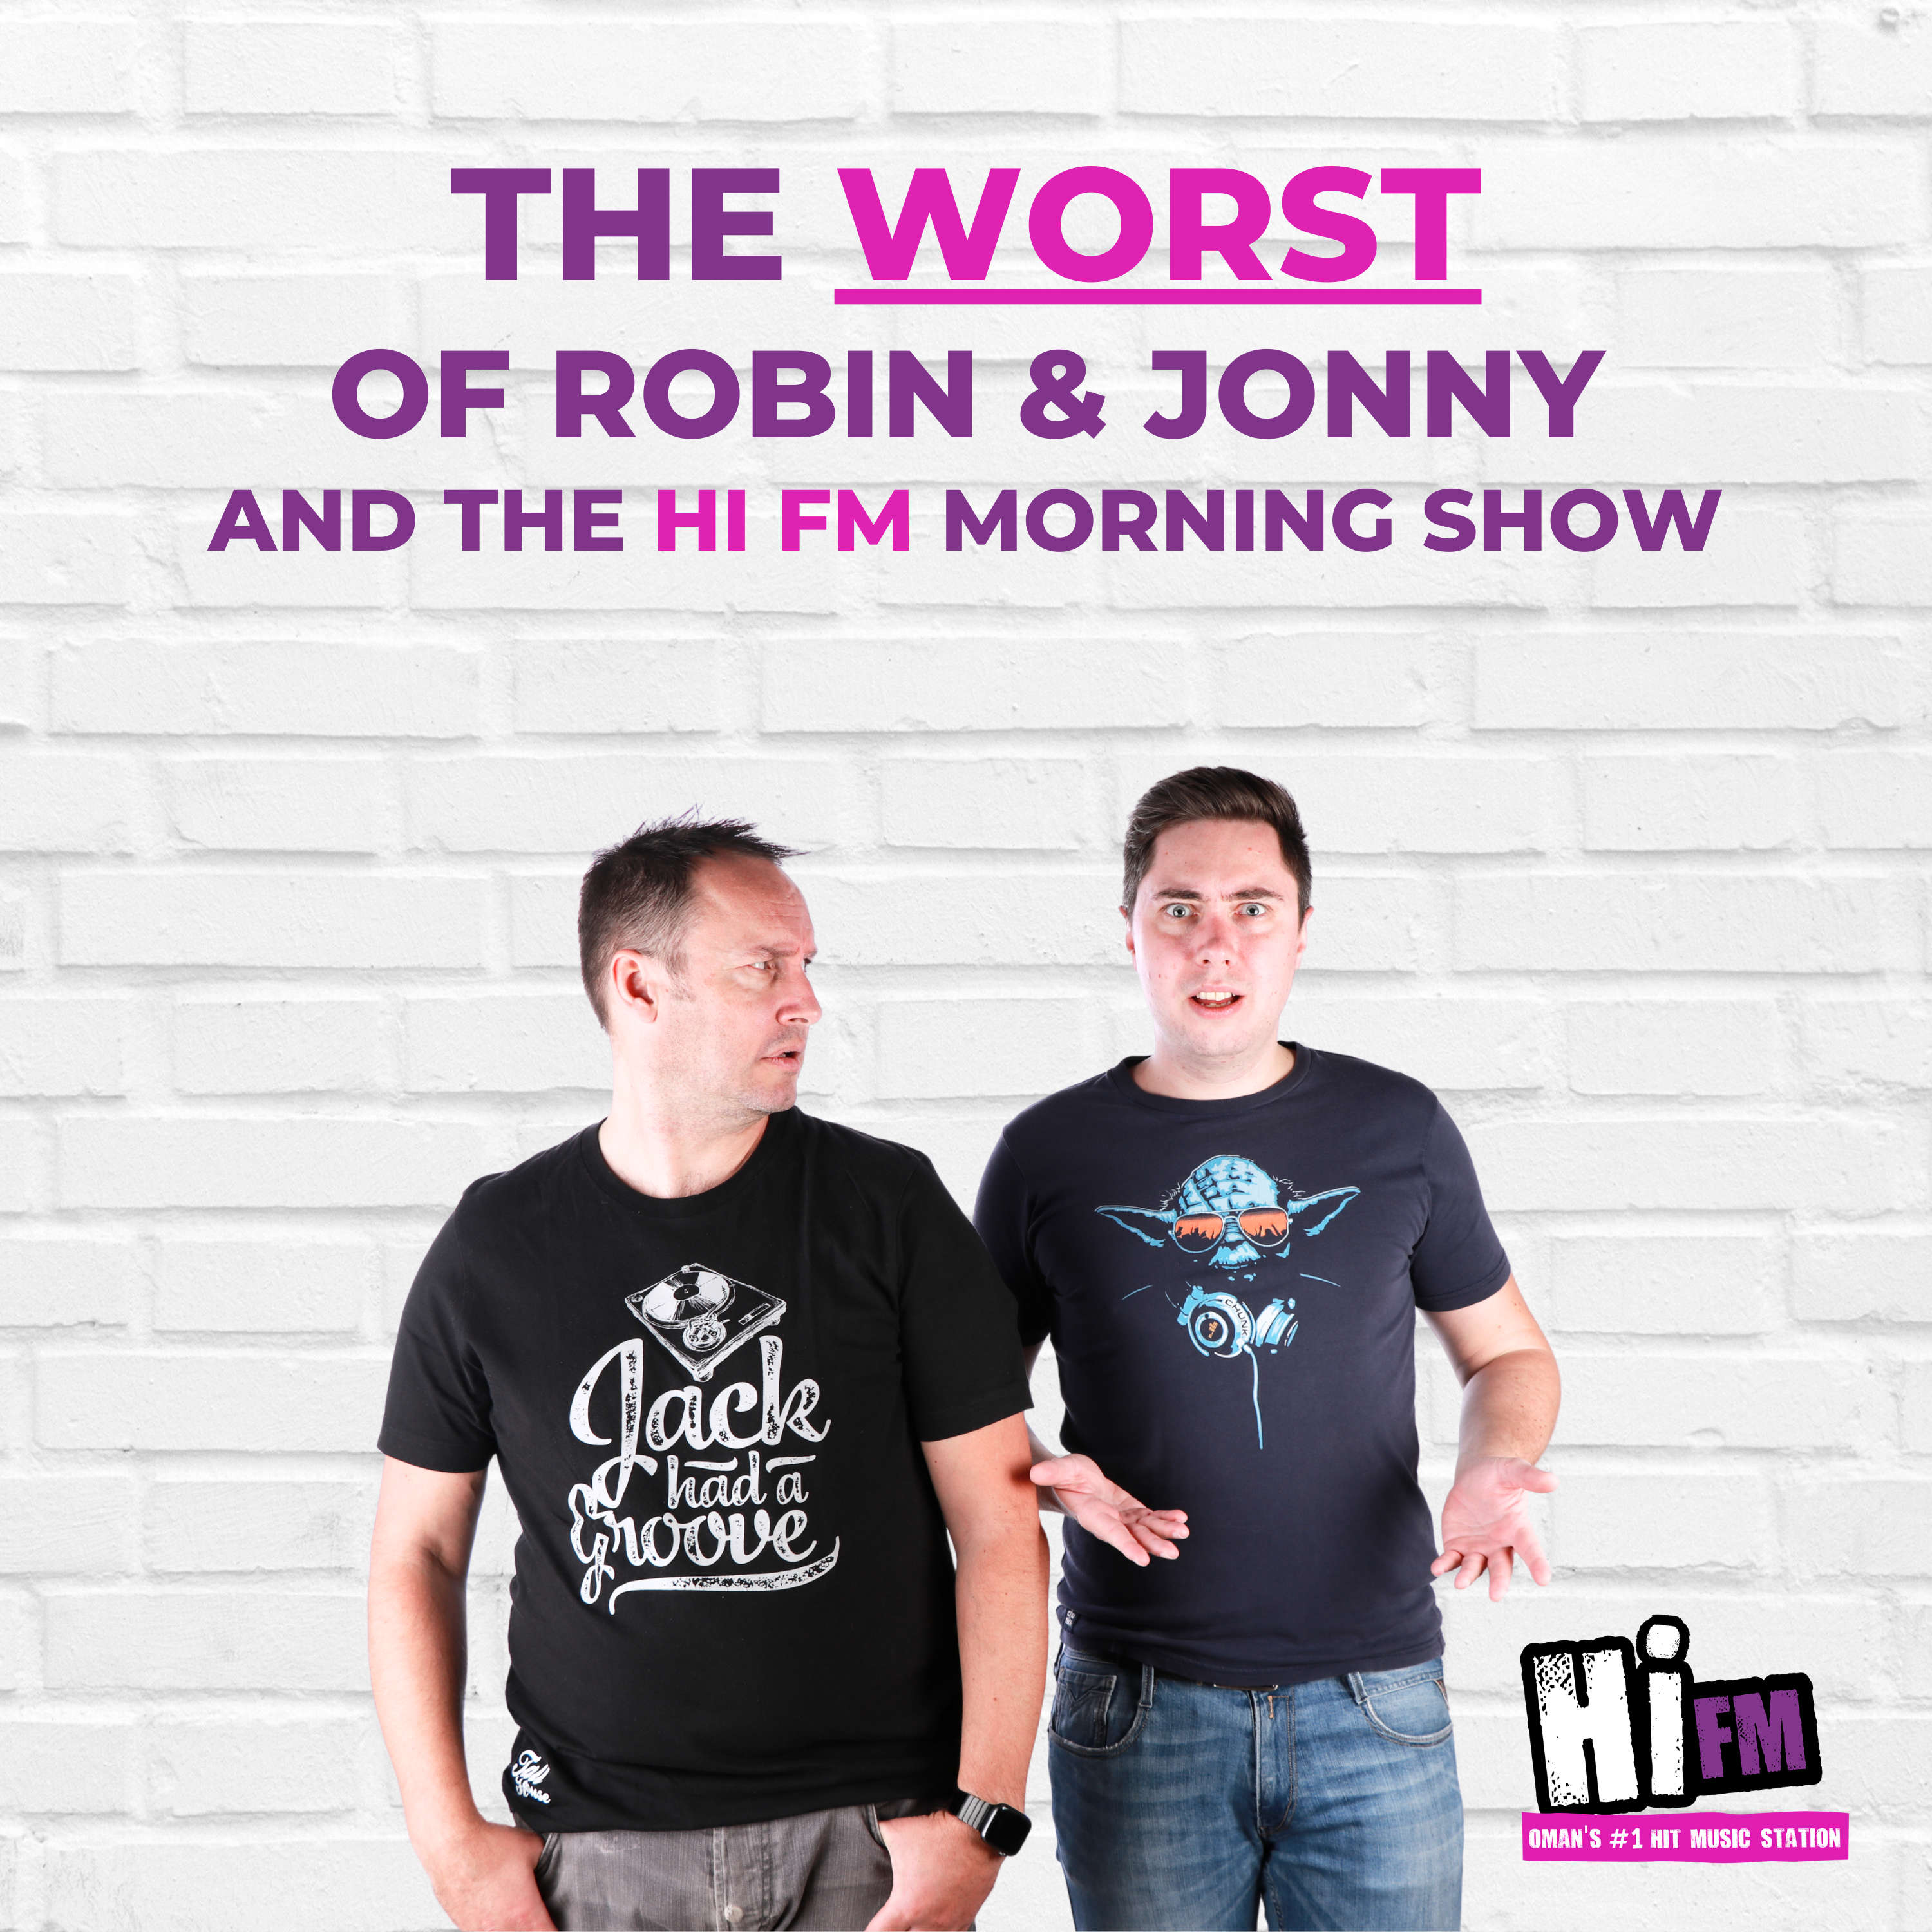 The WORST of Robin & Jonny and the Hi FM Morning Show